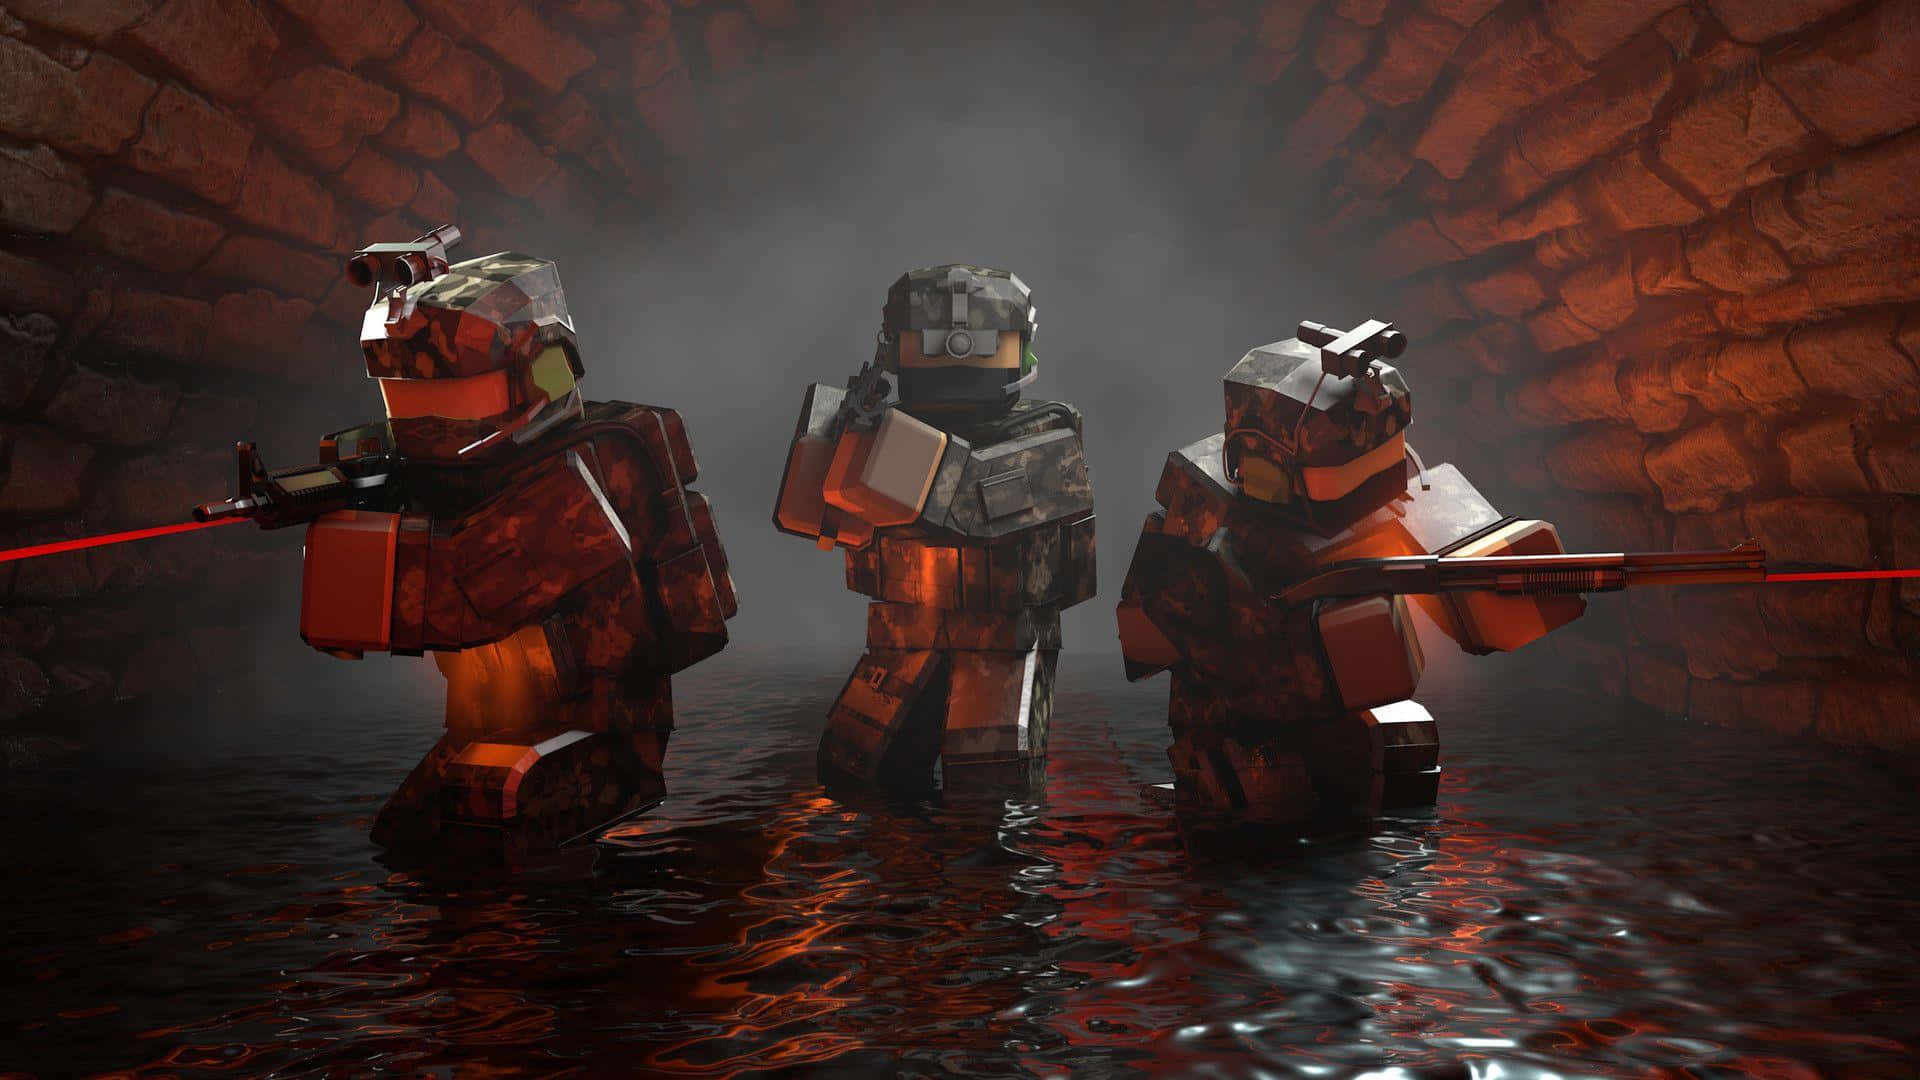 Futuristic Soldiers Wading Through Water Background